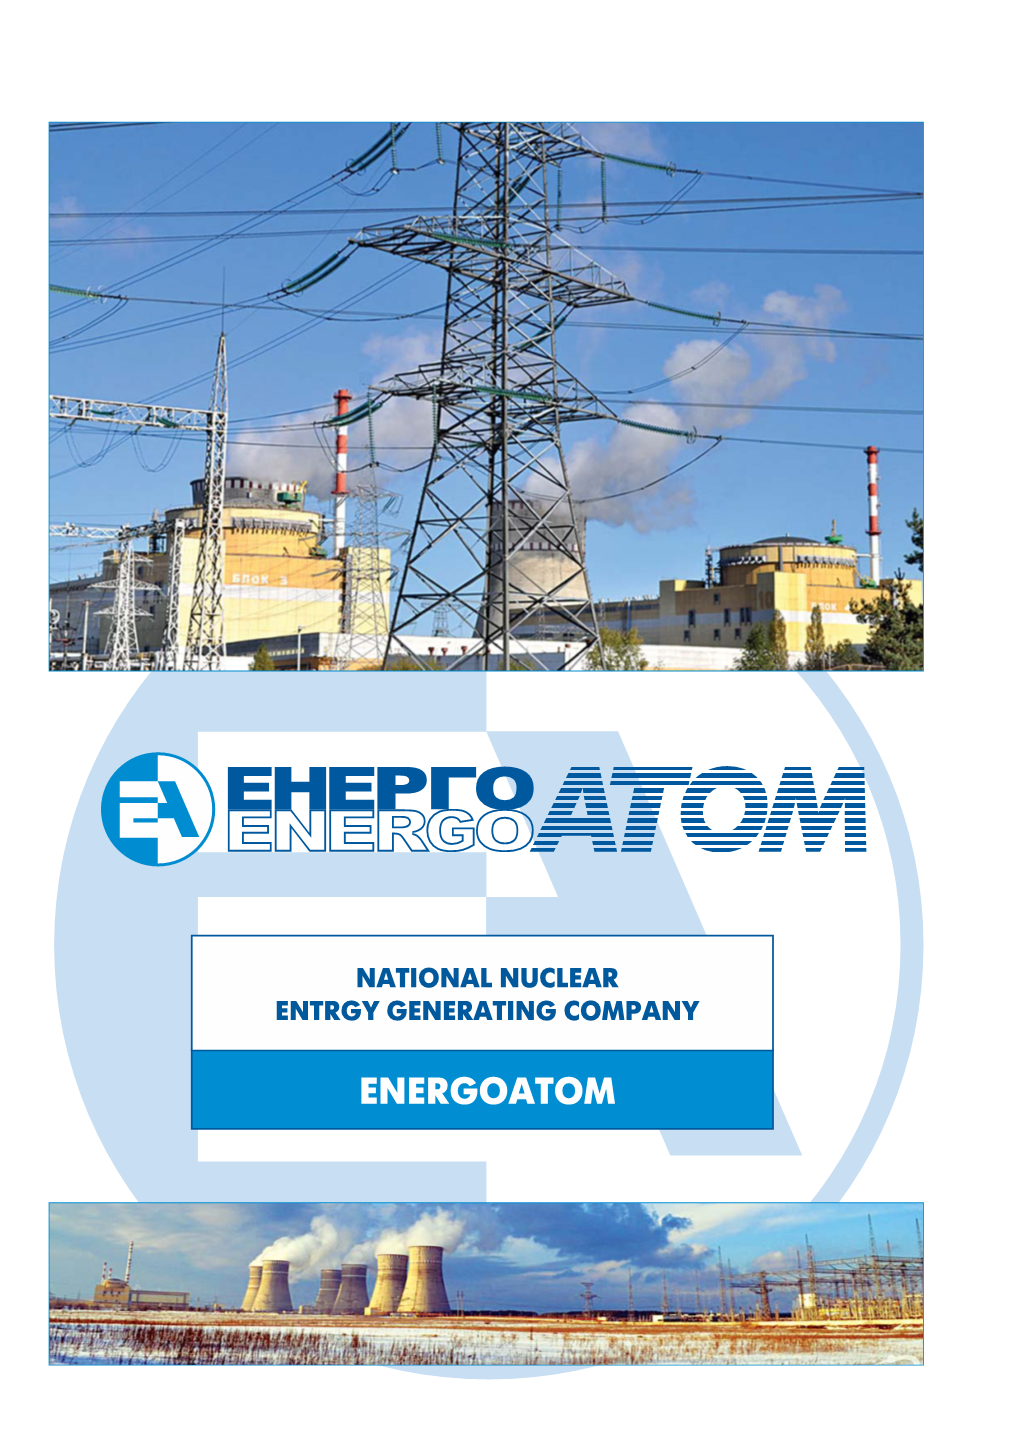 Energoatom Dear Friends, Colleagues and Partners